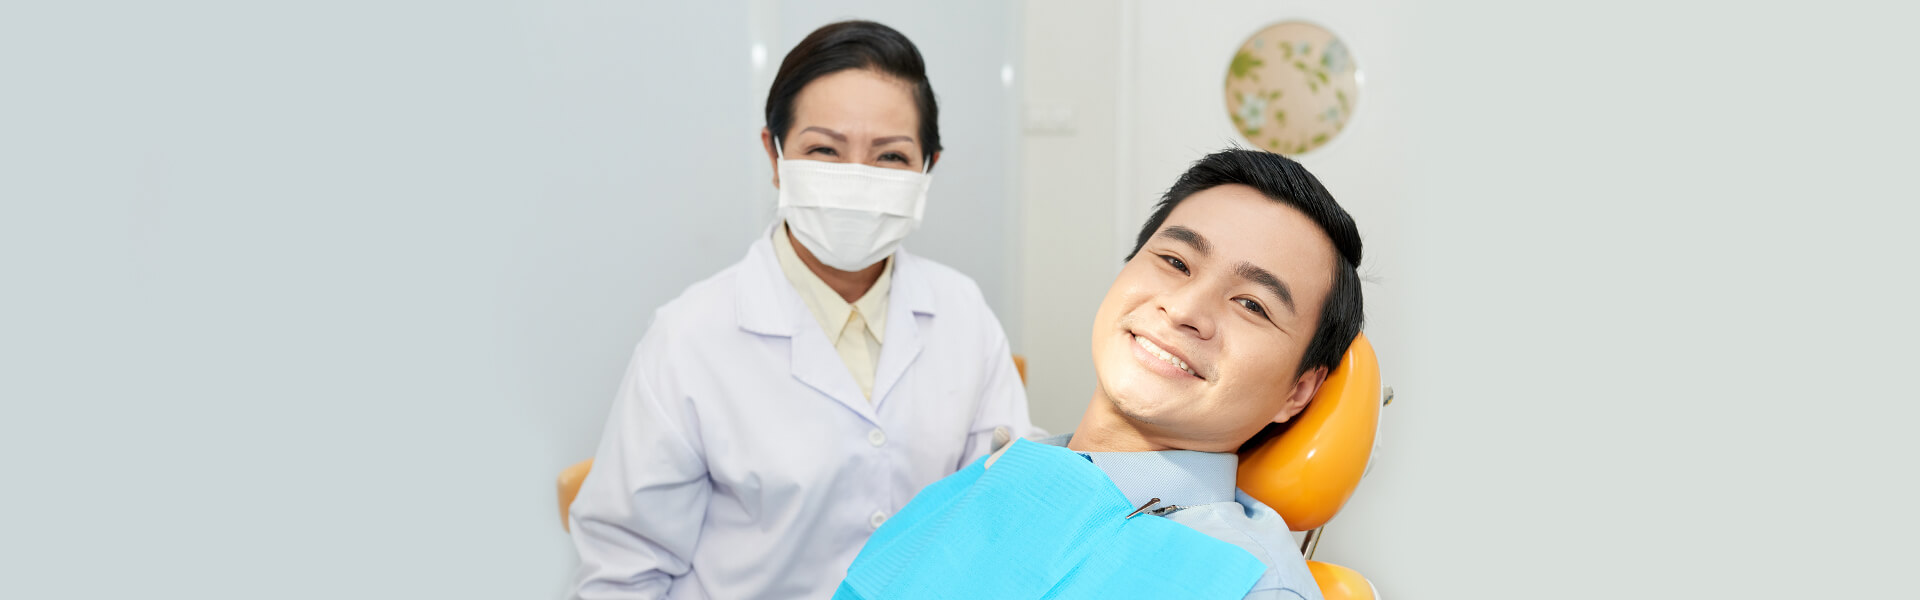 Oral Surgery 101: Check out These Facts About Oral Surgery